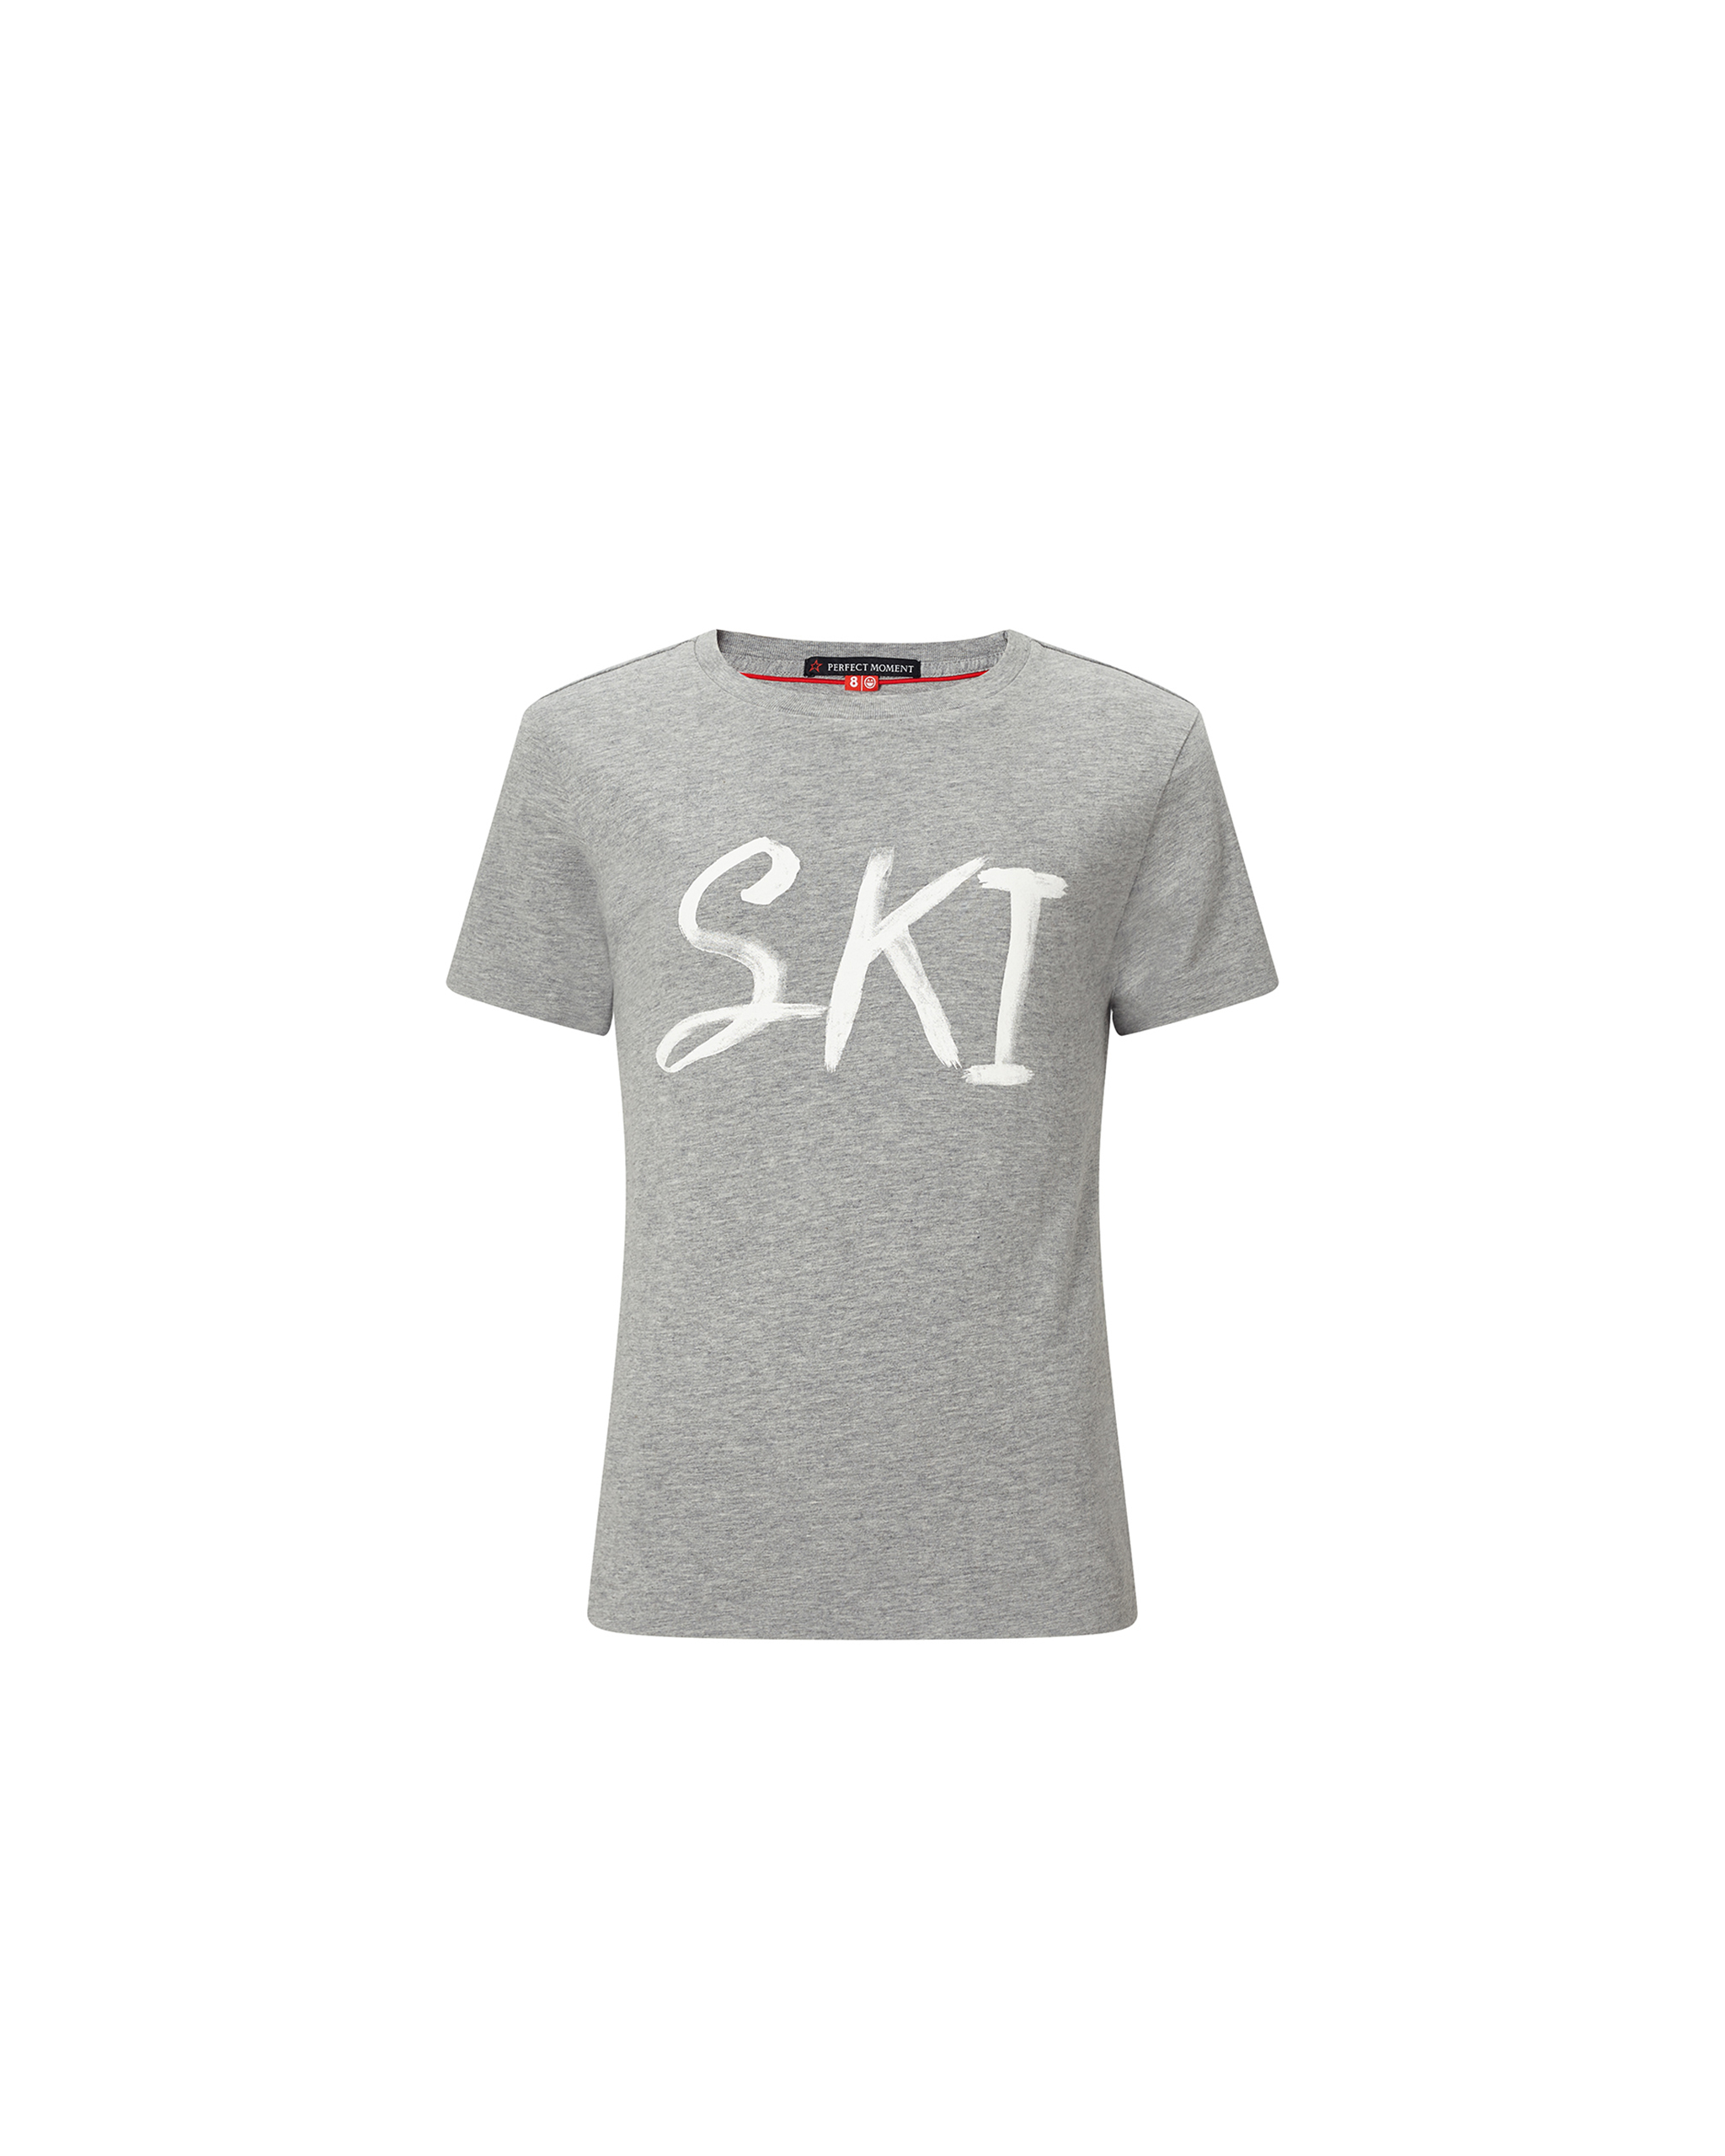 Perfect Moment Ski Tee Y8 In Grey